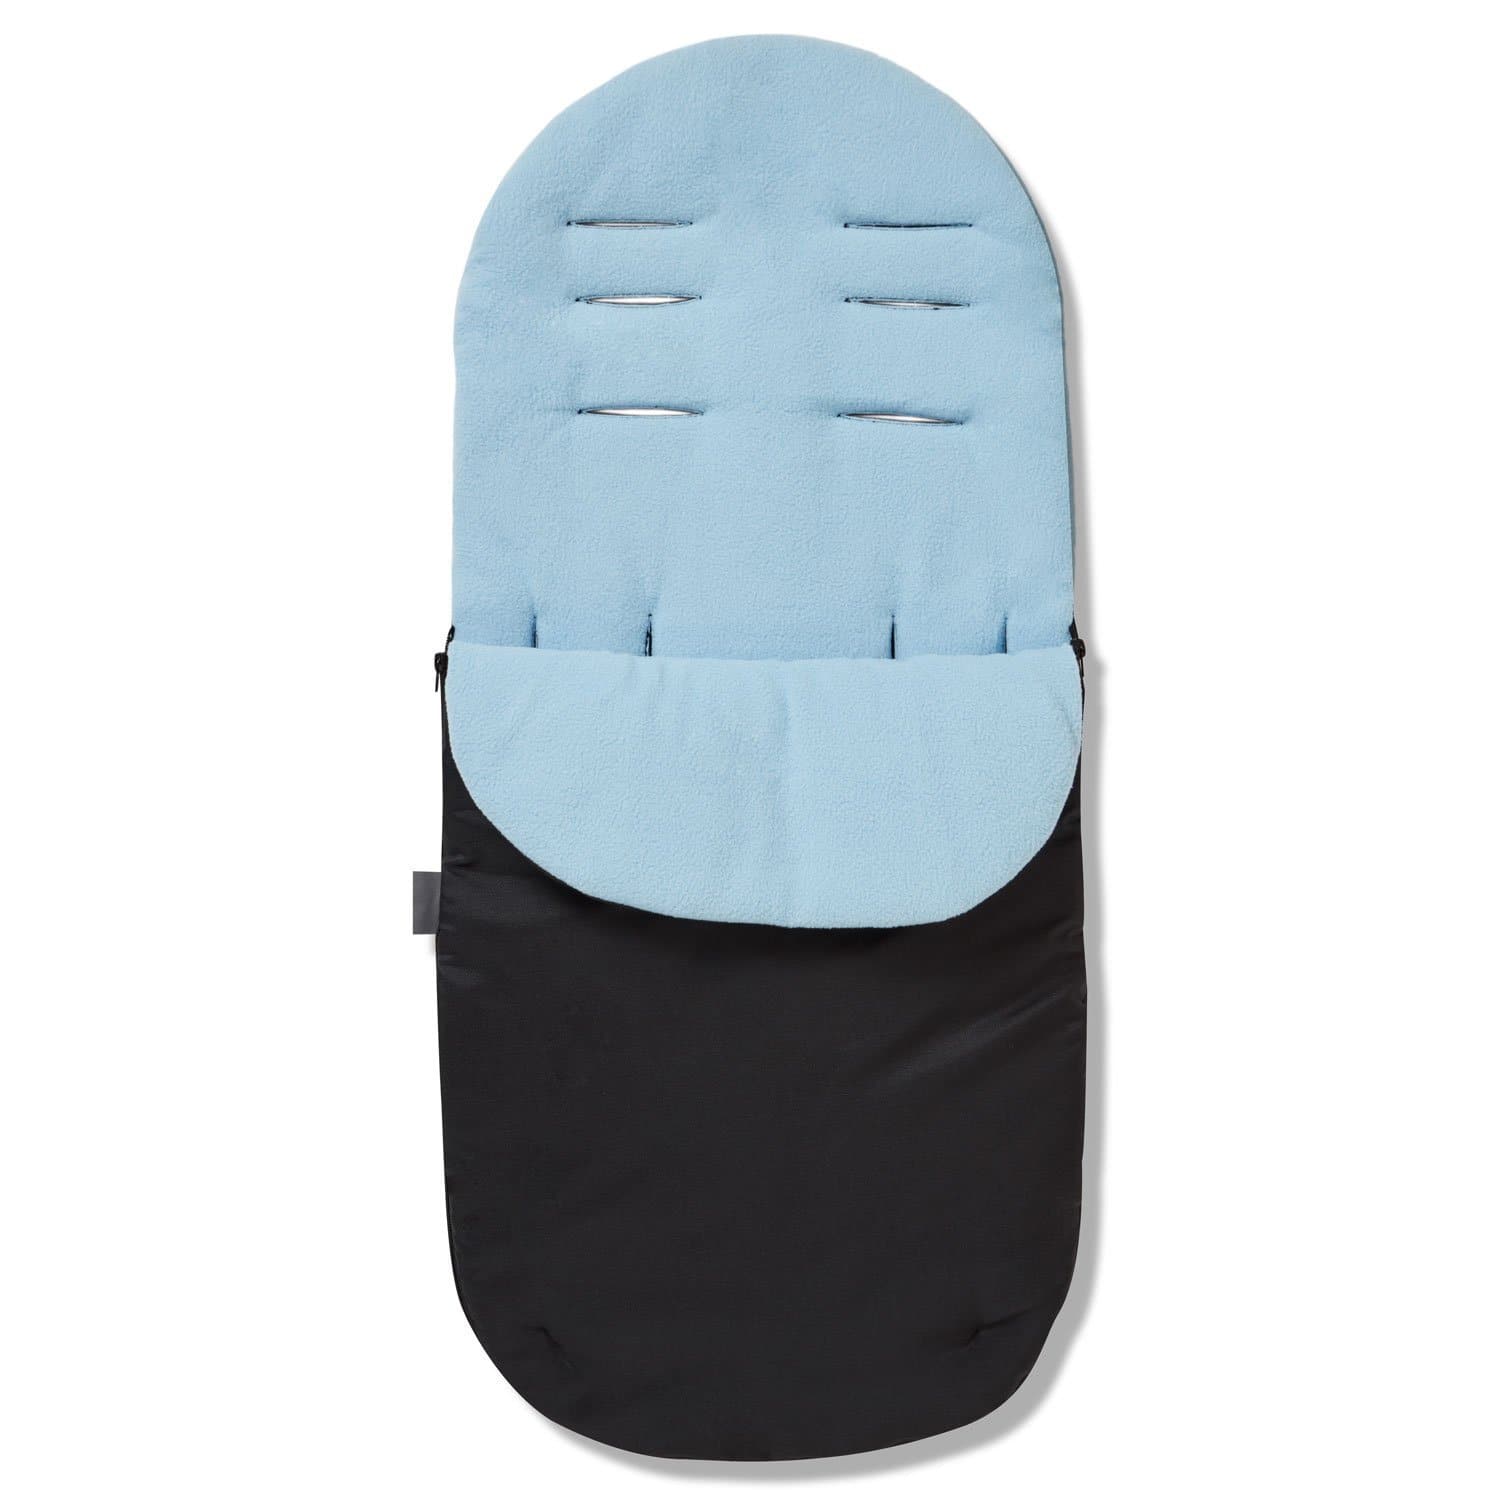 Footmuff / Cosy Toes Compatible with BabyDan - Light Blue / Fits All Models | For Your Little One